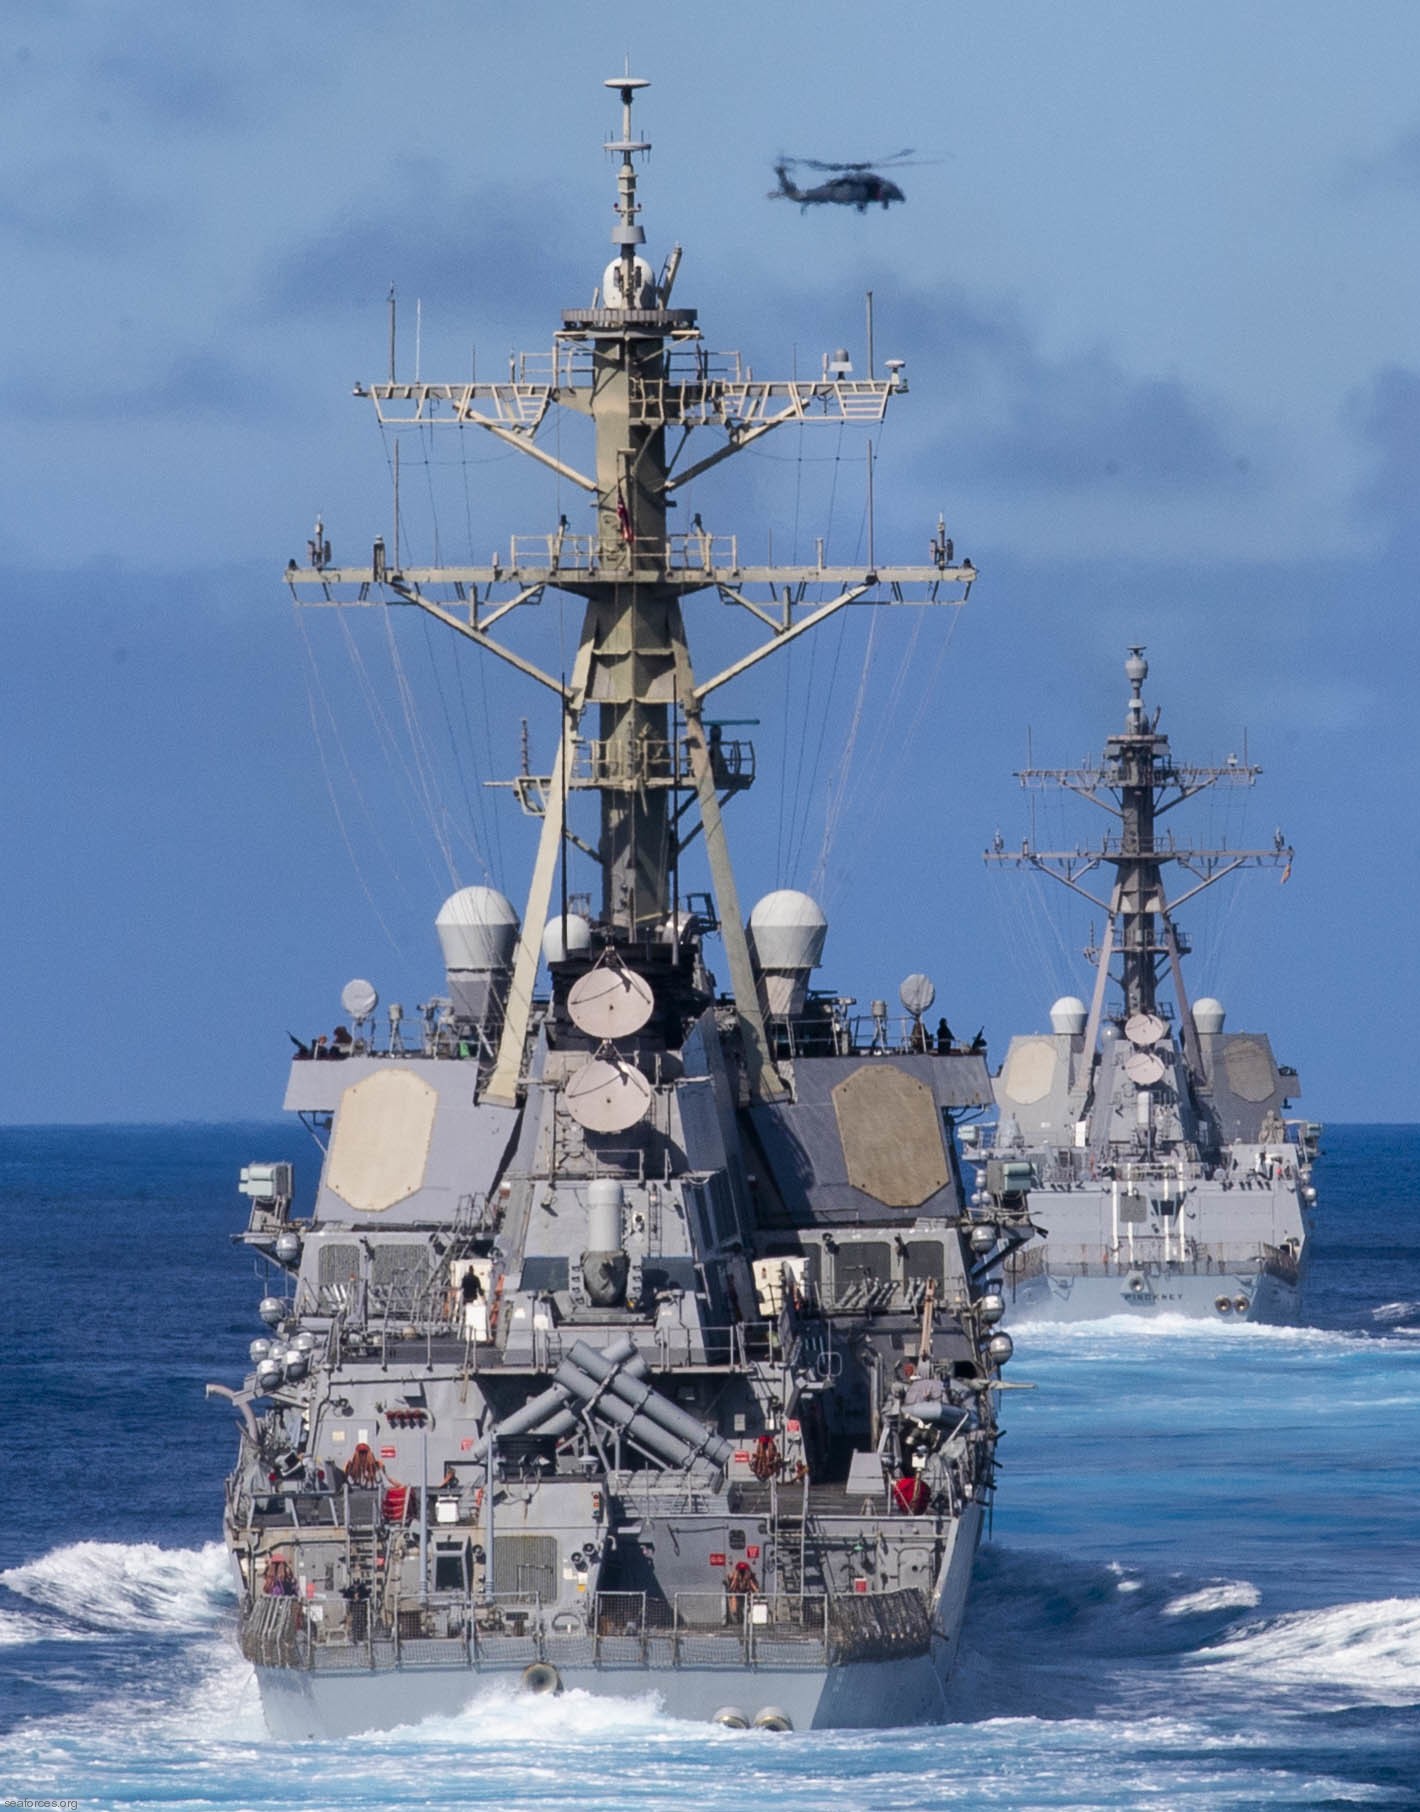 ddg-59 uss russell arleigh burke class guided missile destroyer us navy aegis 59